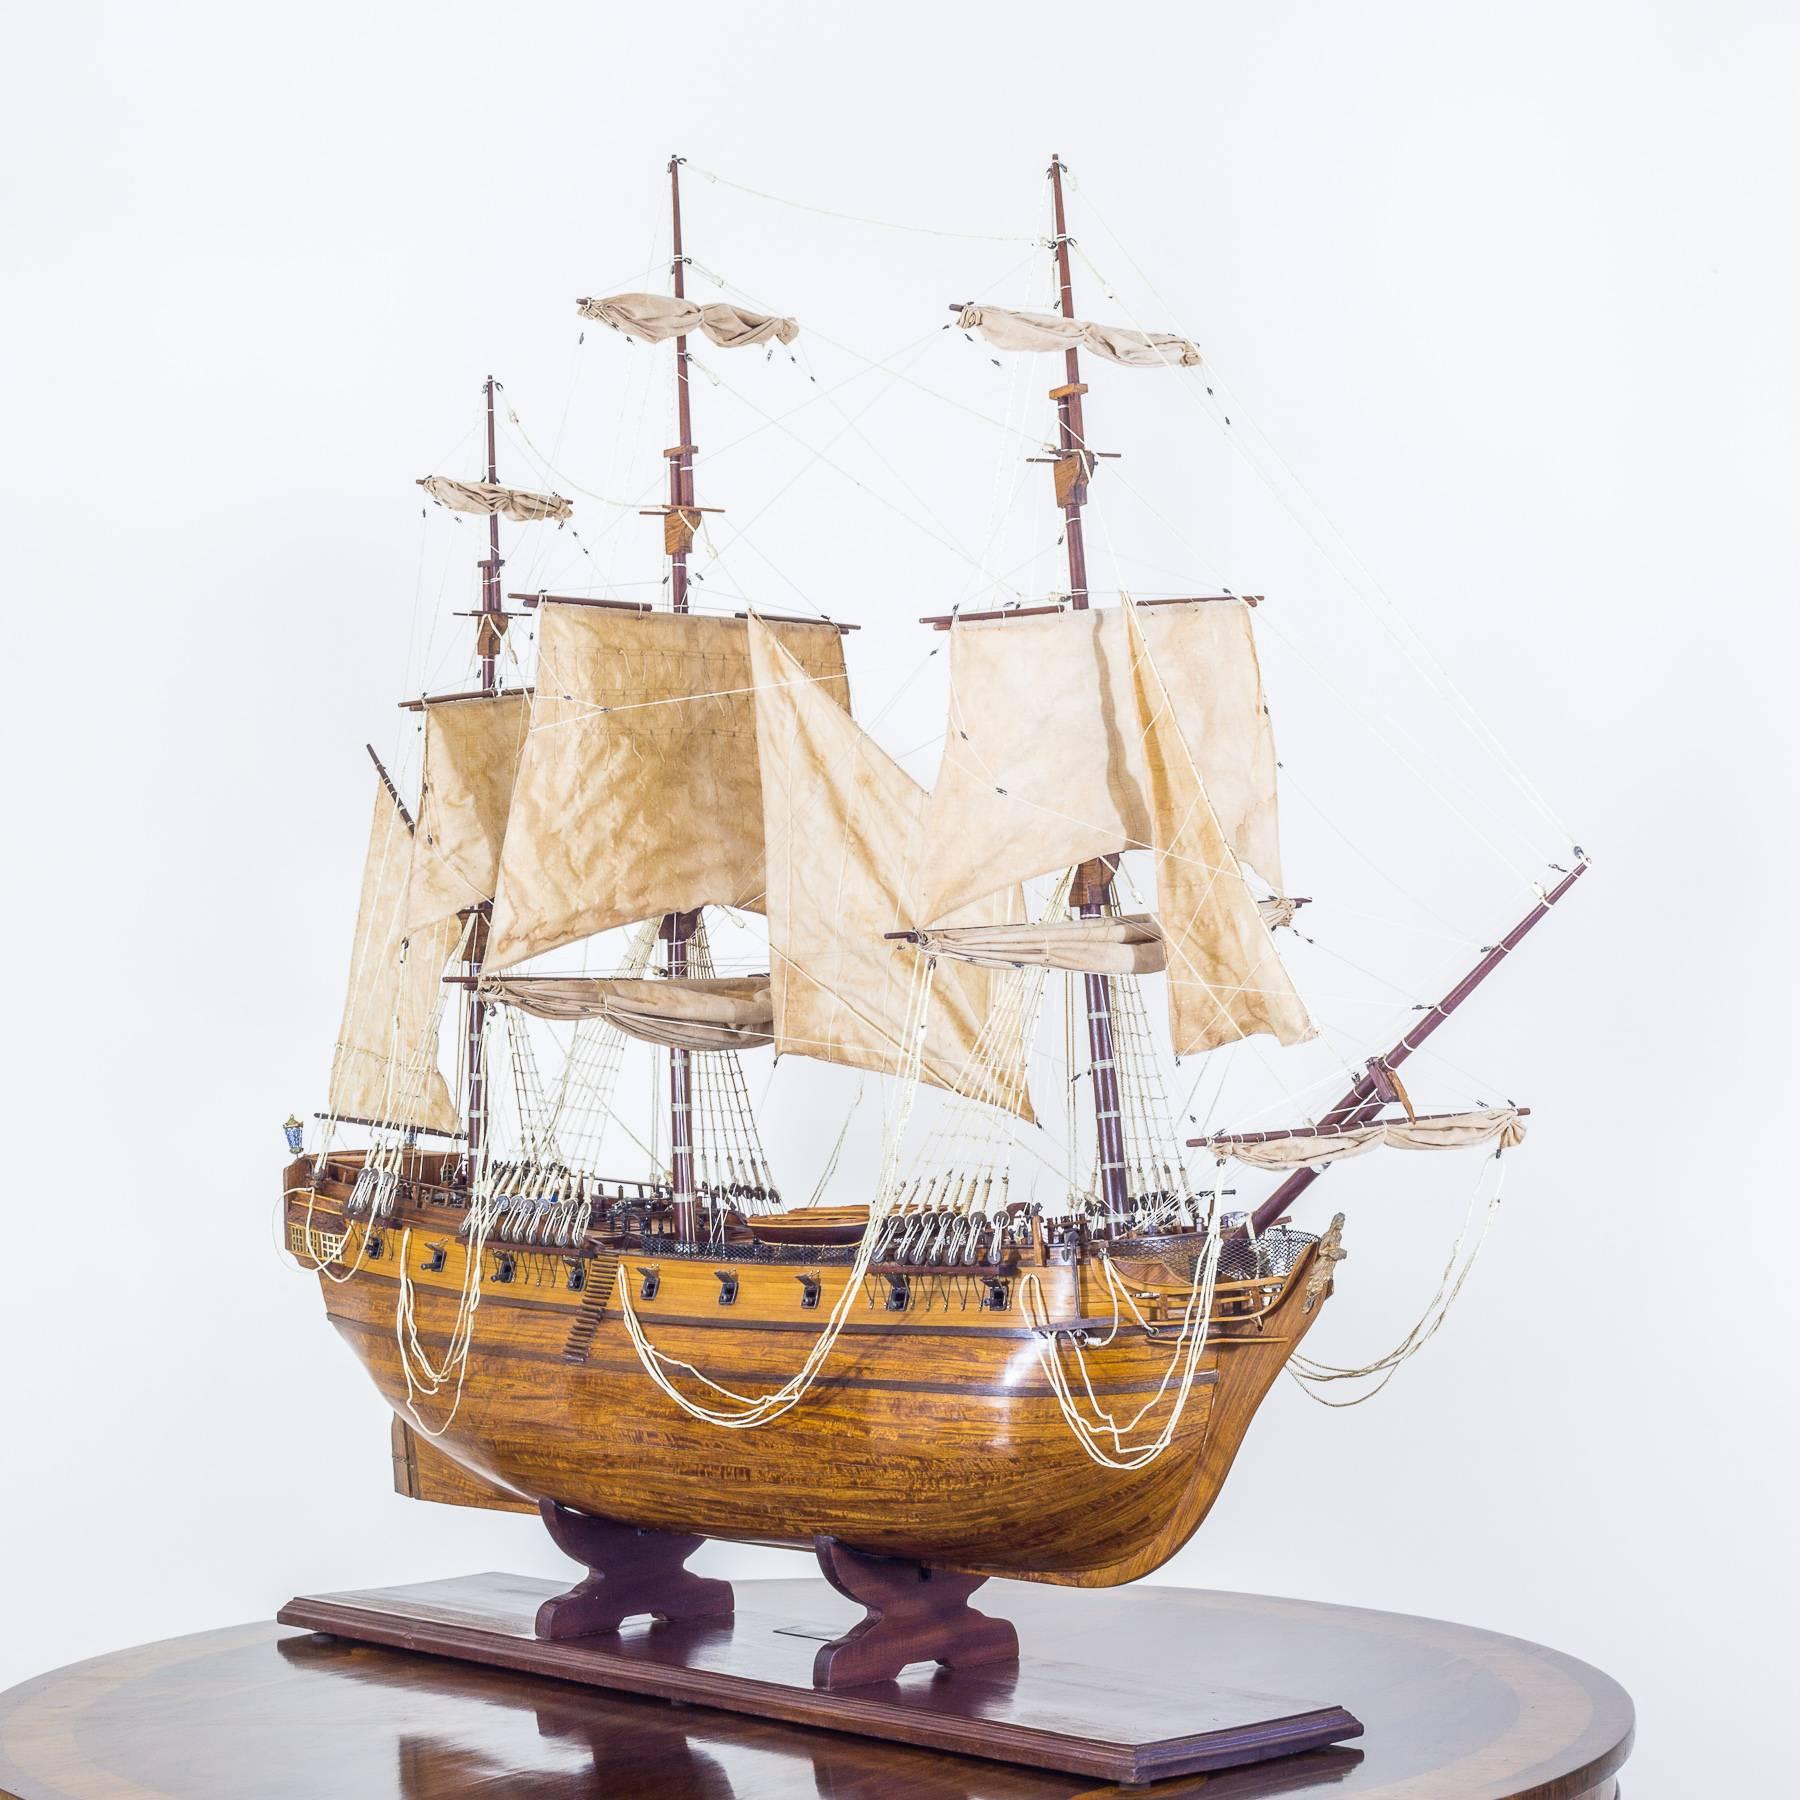 A superb finely detailed large scale model of the famous 6th Rate 24-Gun Frigate HMS Pandora, 1779.

English, early 20th century.

Handcrafted of satinwood, boxwood, mahogany, holly and other fine timbers with a stunning attention to detail.